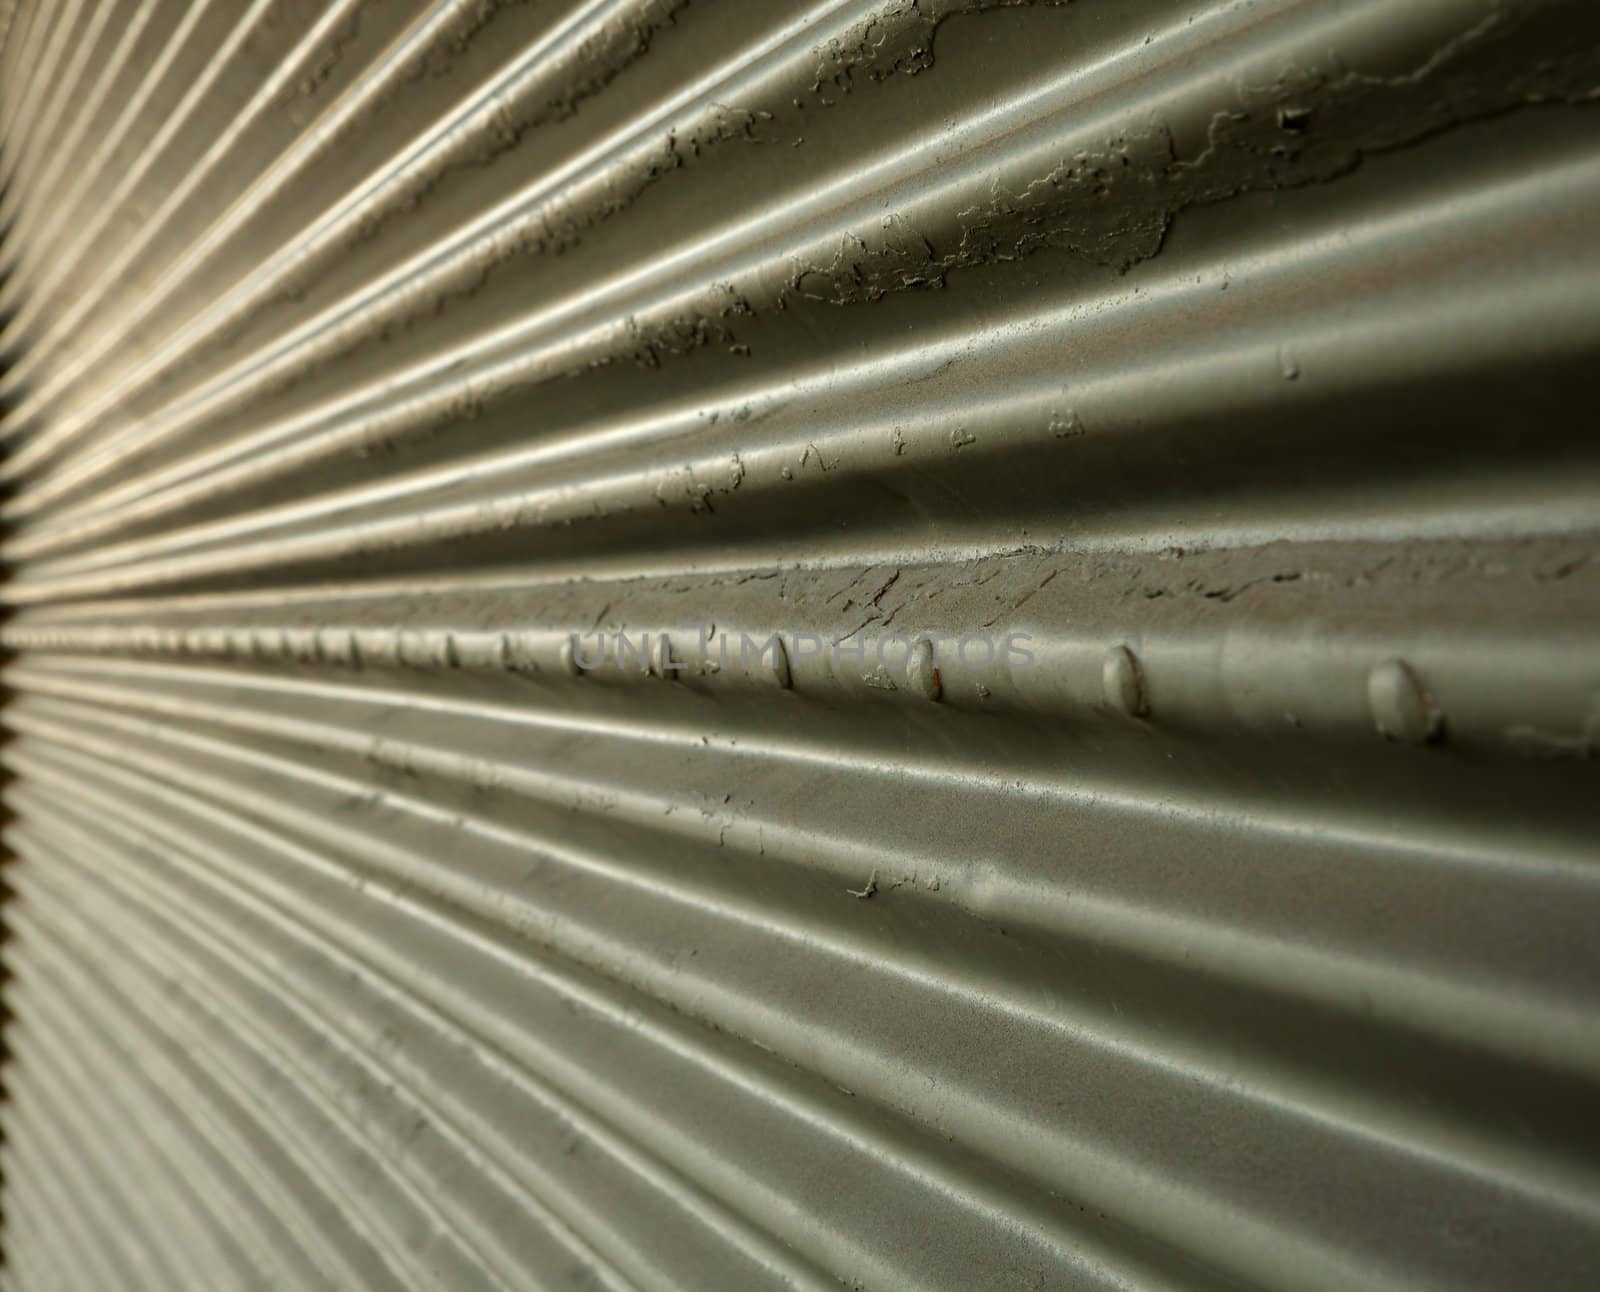 Corrugated Perspective by bobkeenan